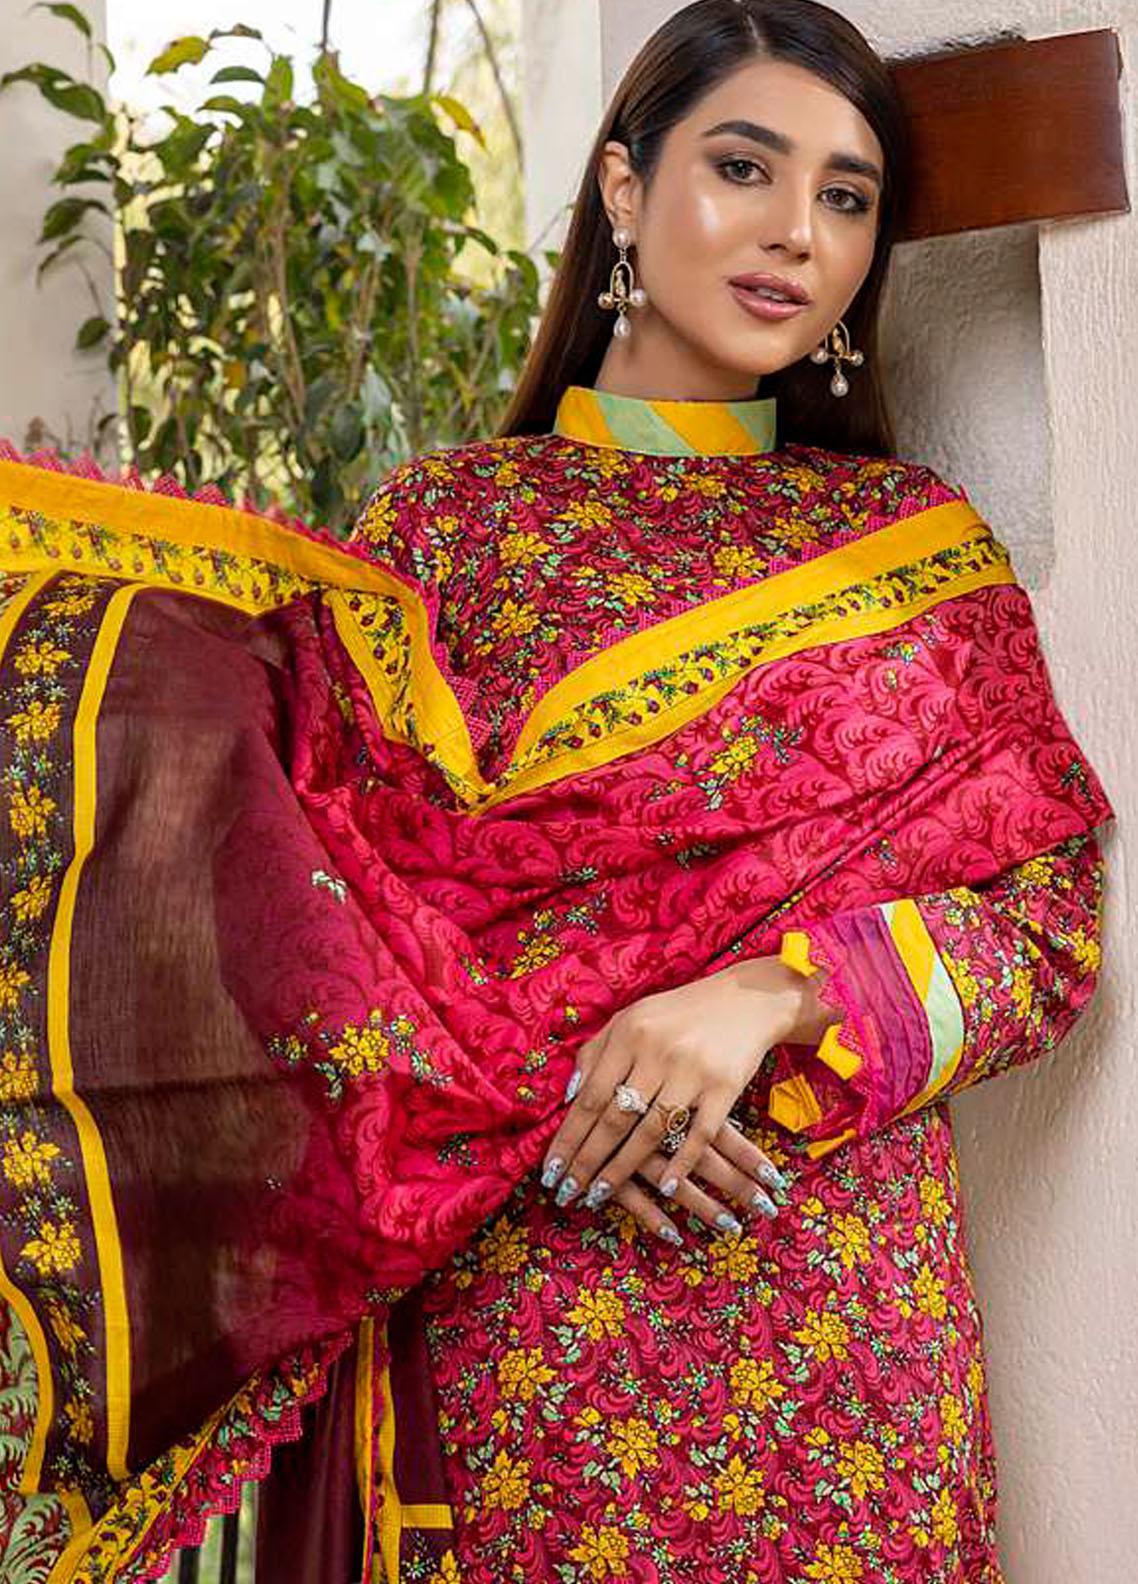 Monsoon Bahar By Al Zohaib Printed Lawn Suits Unstitched 3 Piece - 2B - Summer Collection